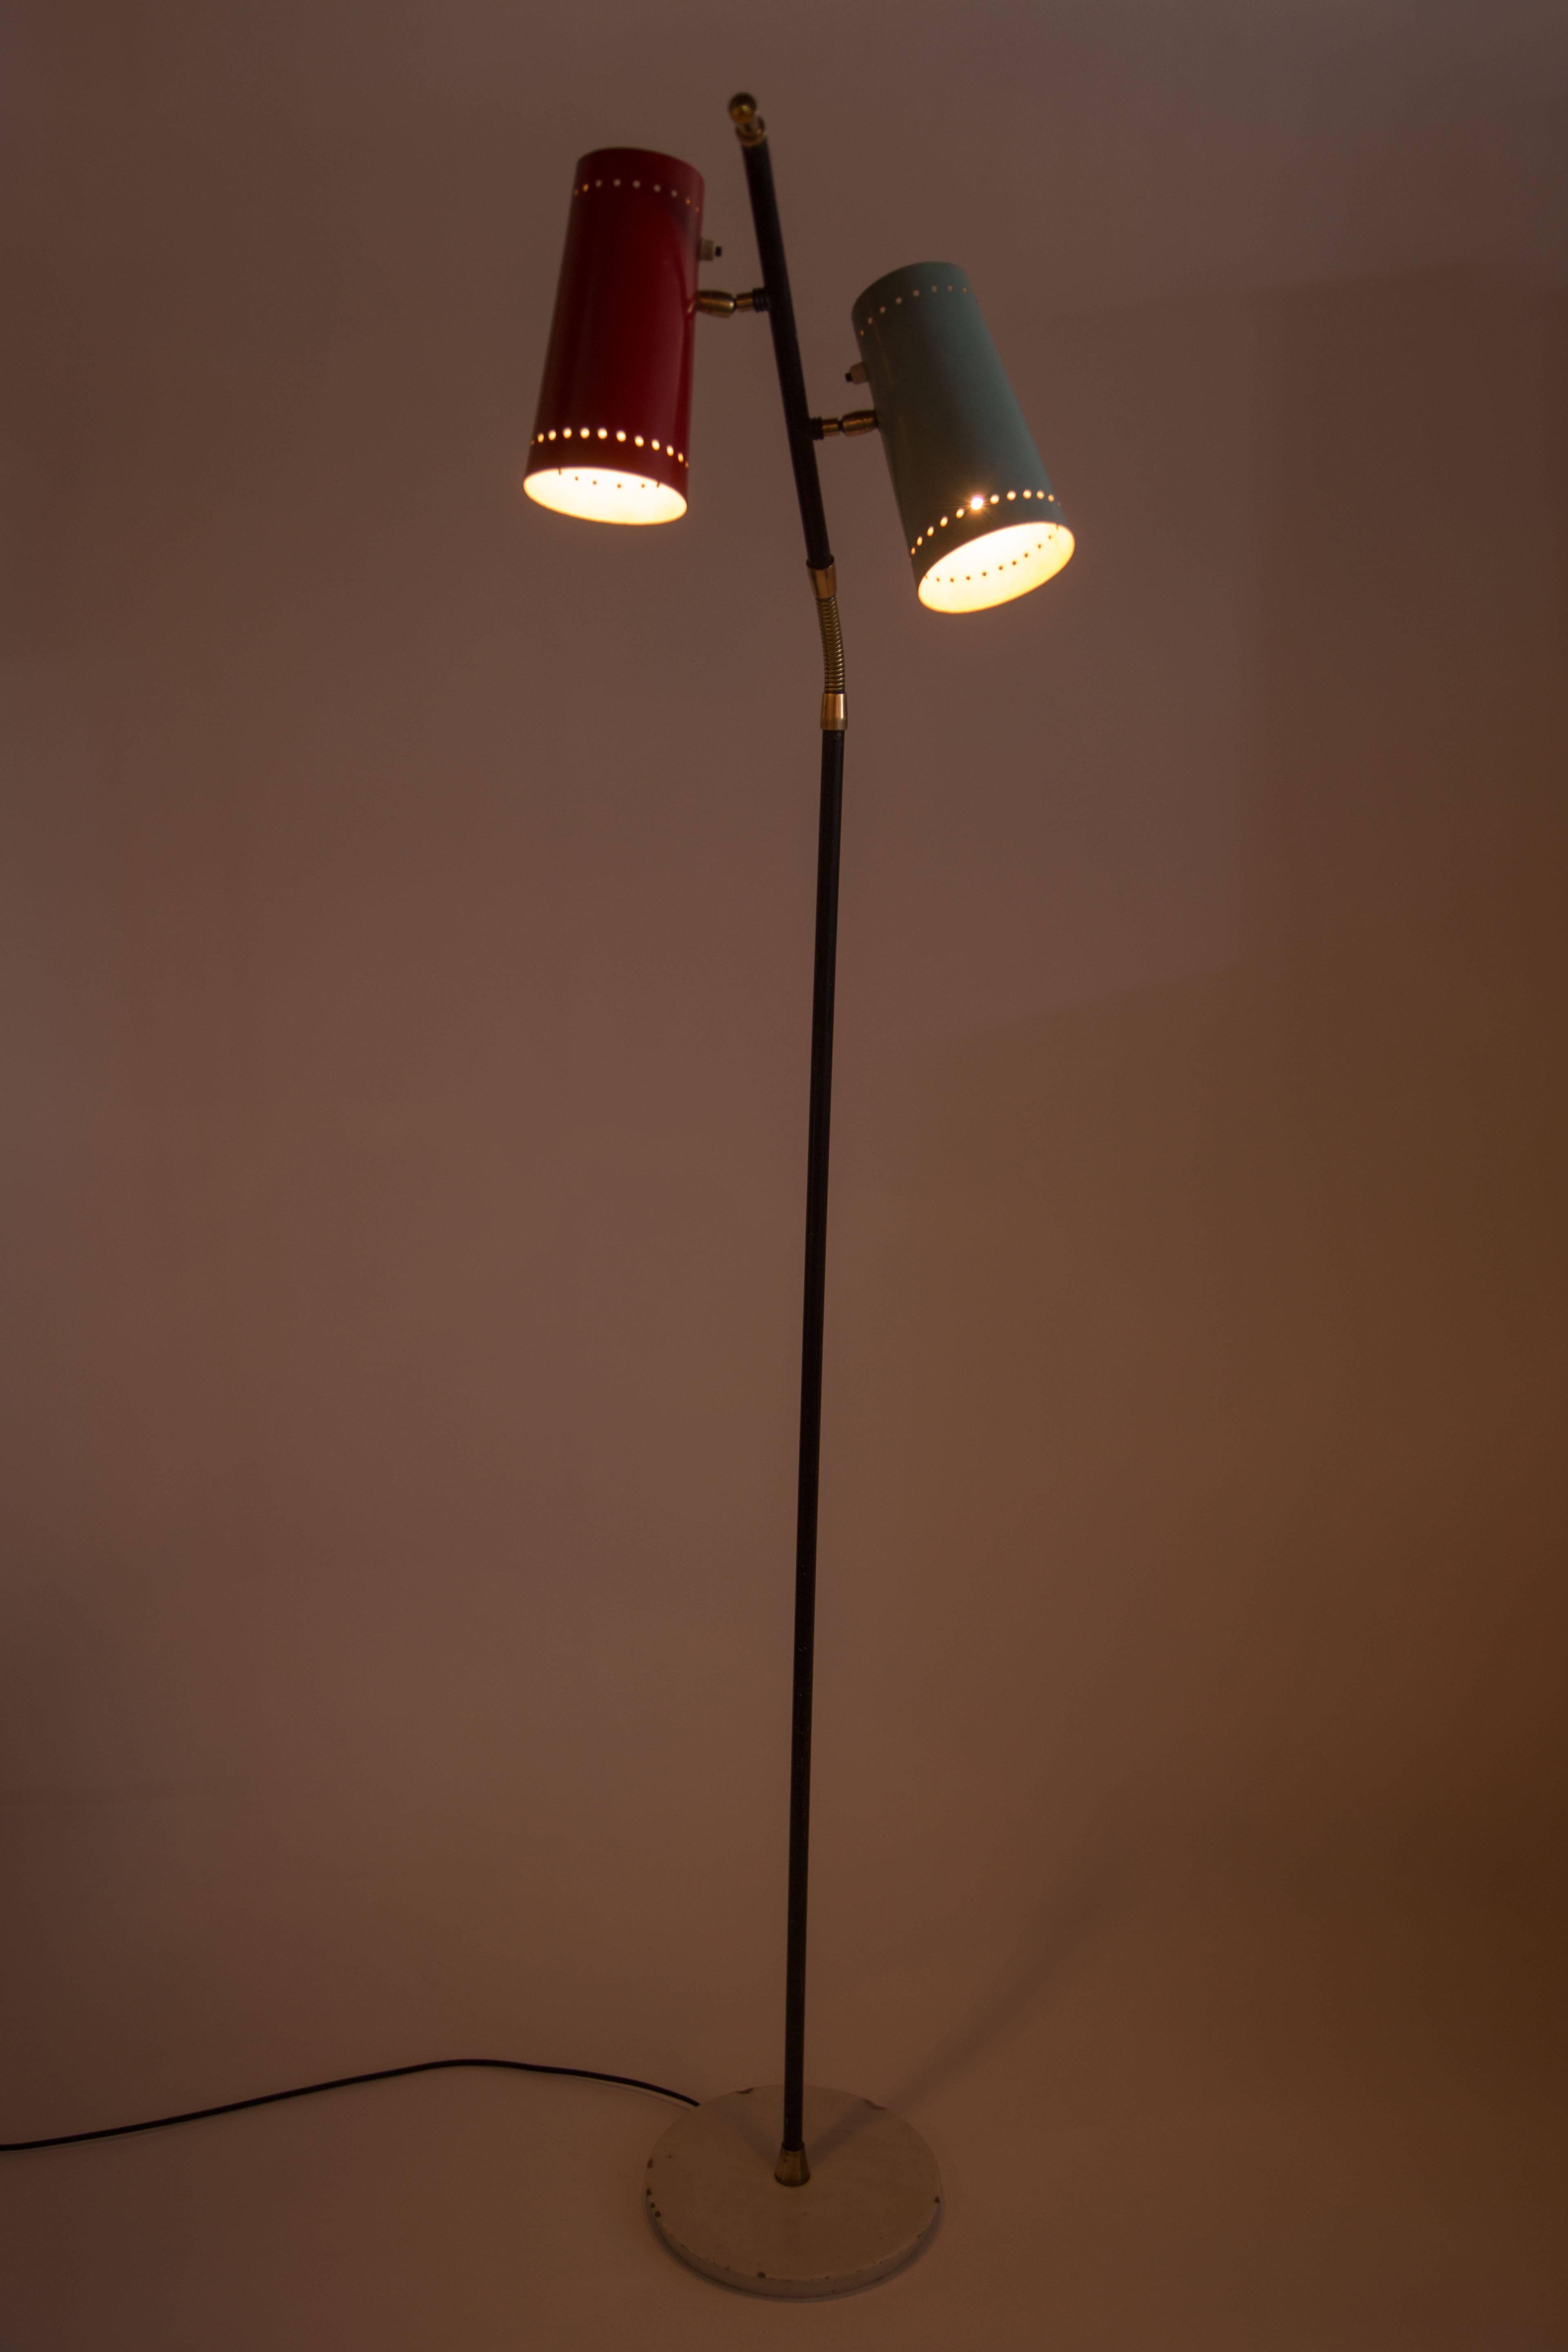 Floor lamp with two pivoting shades, adjustable brass goose neck and marble base designed by Stilux in Italy circa 1950's. Original cord. Takes two E27 75w maximum bulbs